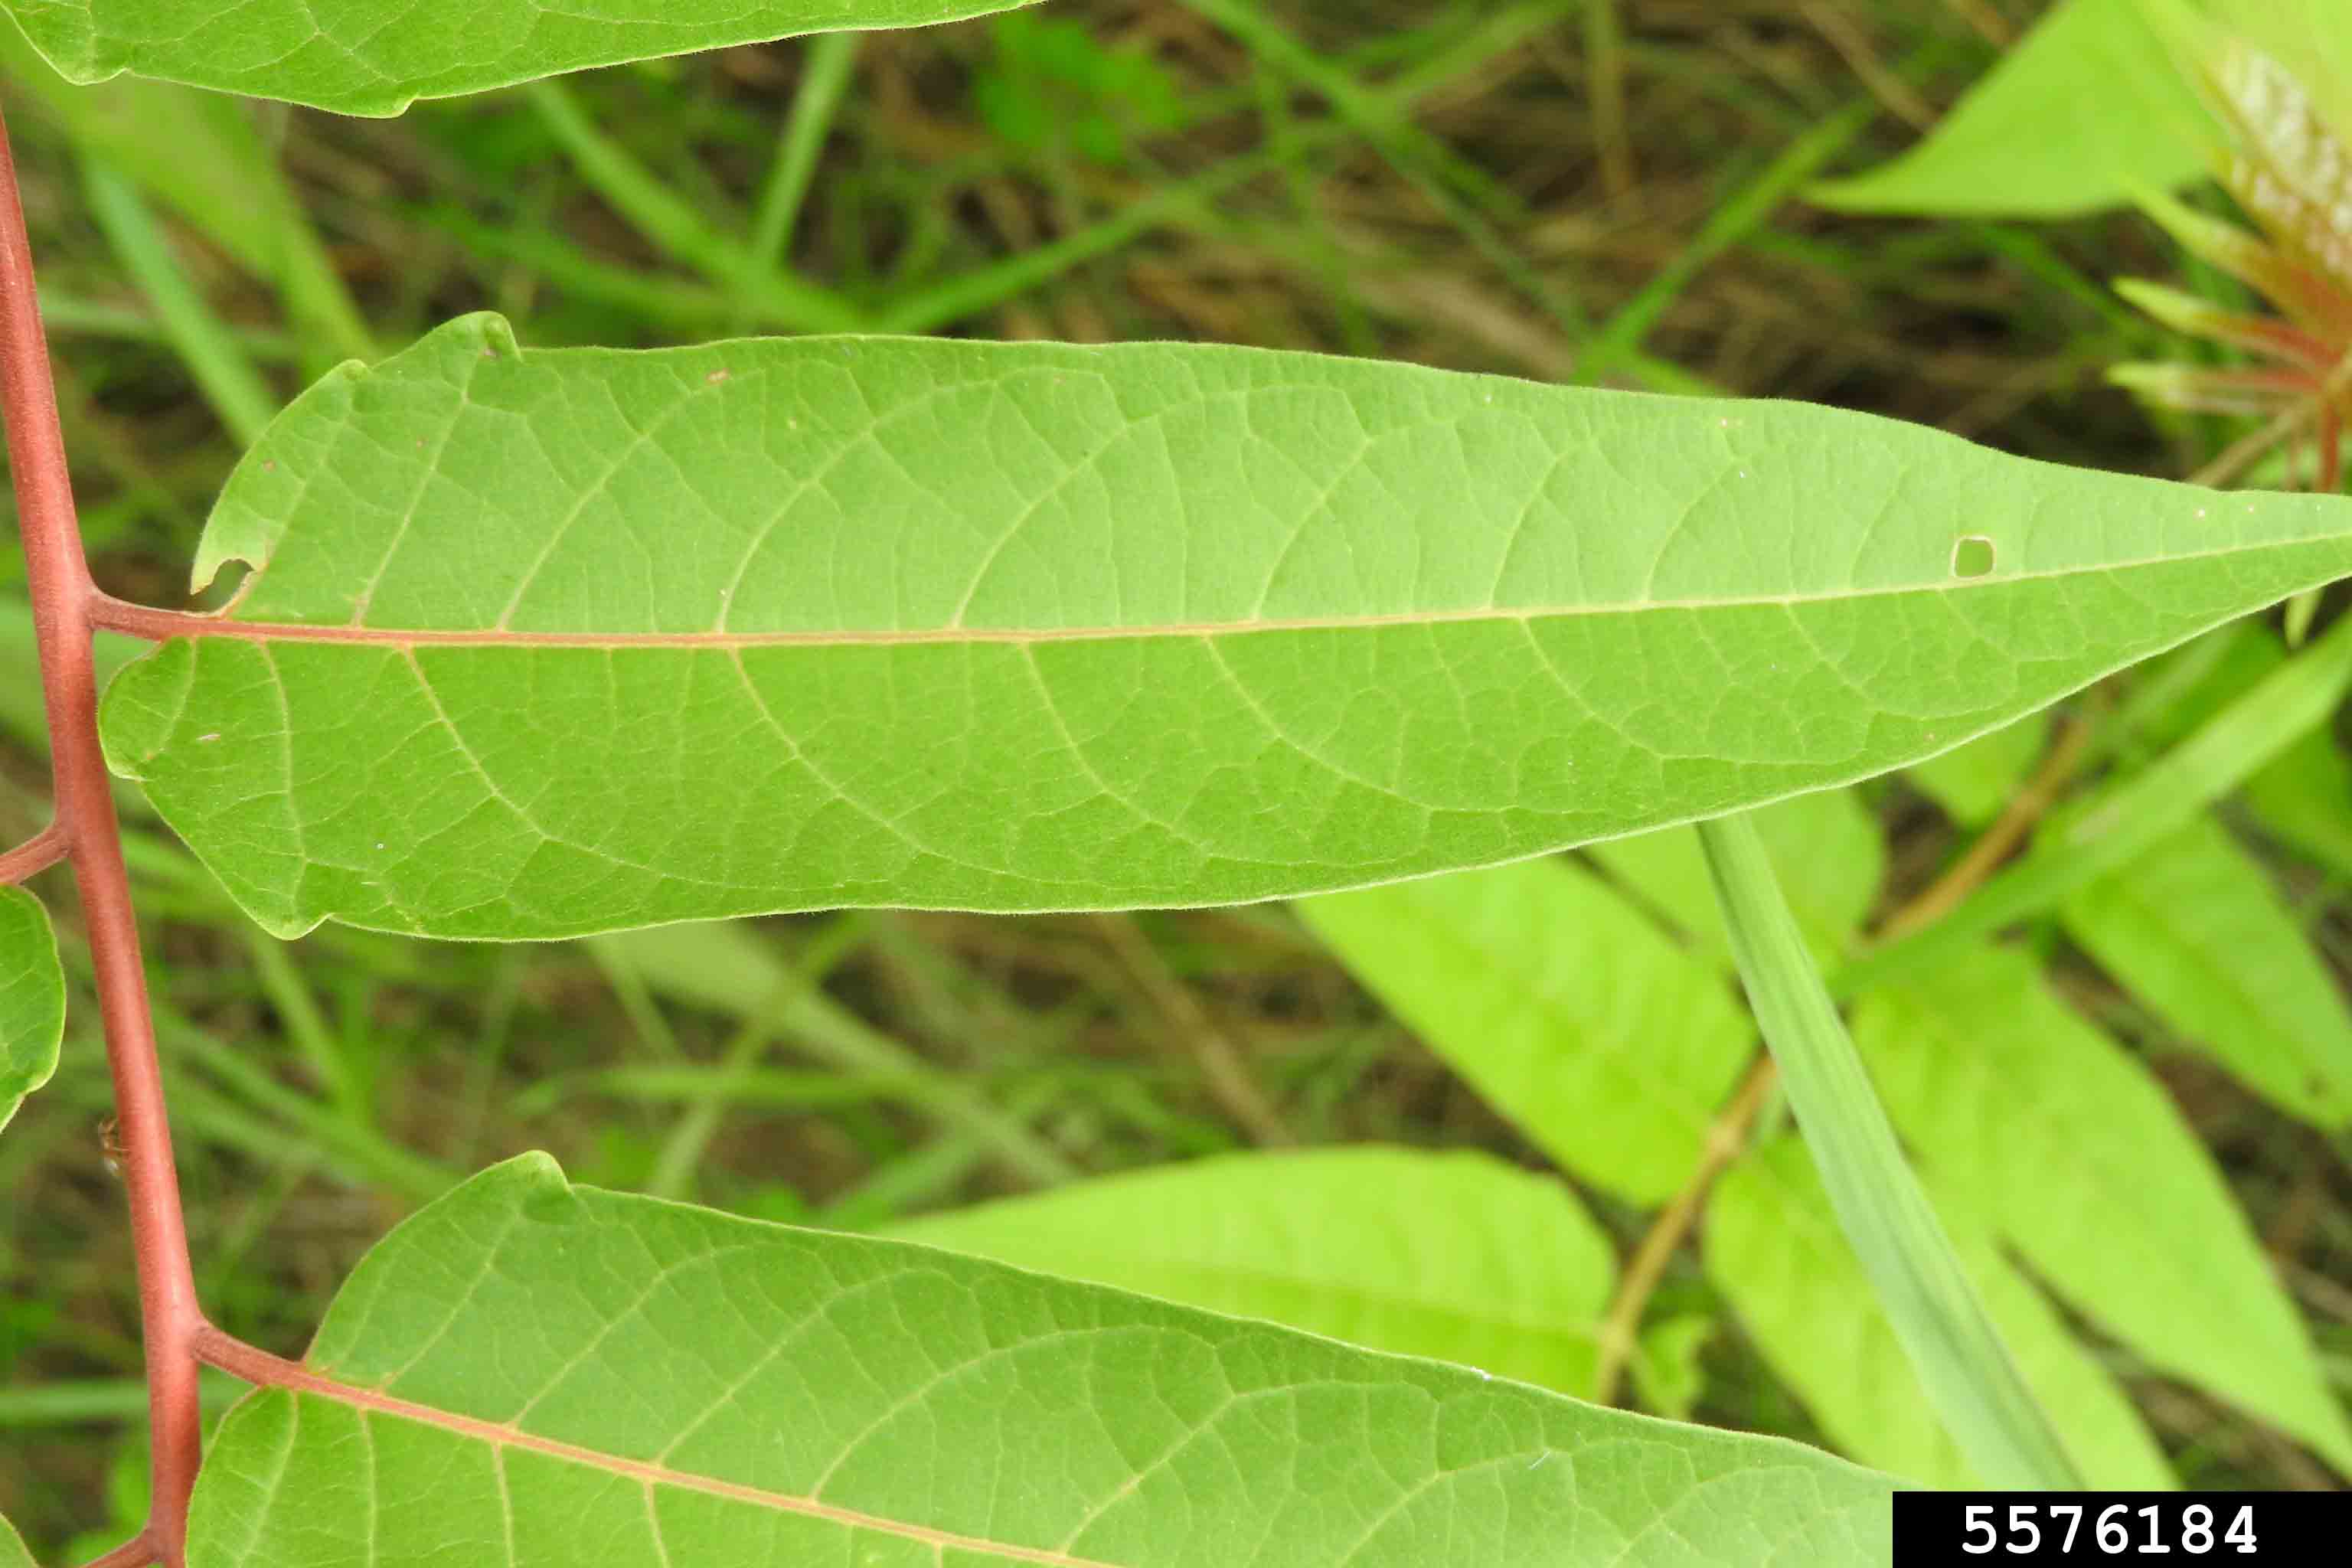 Tree of heaven leaflet of 18"-24" compound leaf, showing coarse, rounded teeth near base